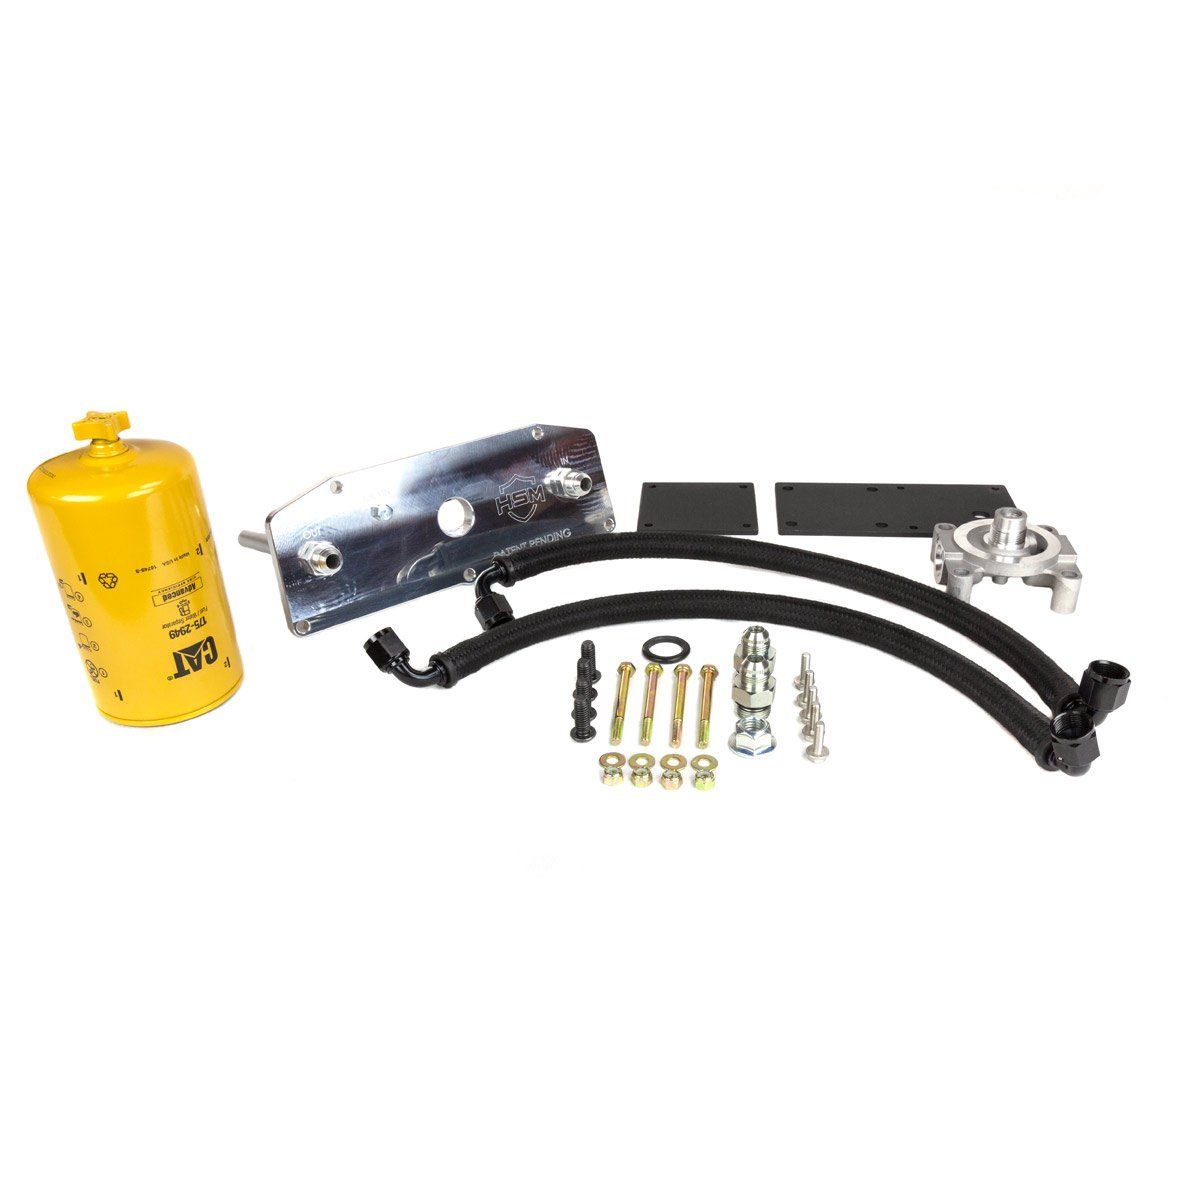 H&S Motorsports - H&S Lower Fuel Filter Upgrade Kit 17-21 Ford 6.7 Powerstroke Short Bed AM Tank